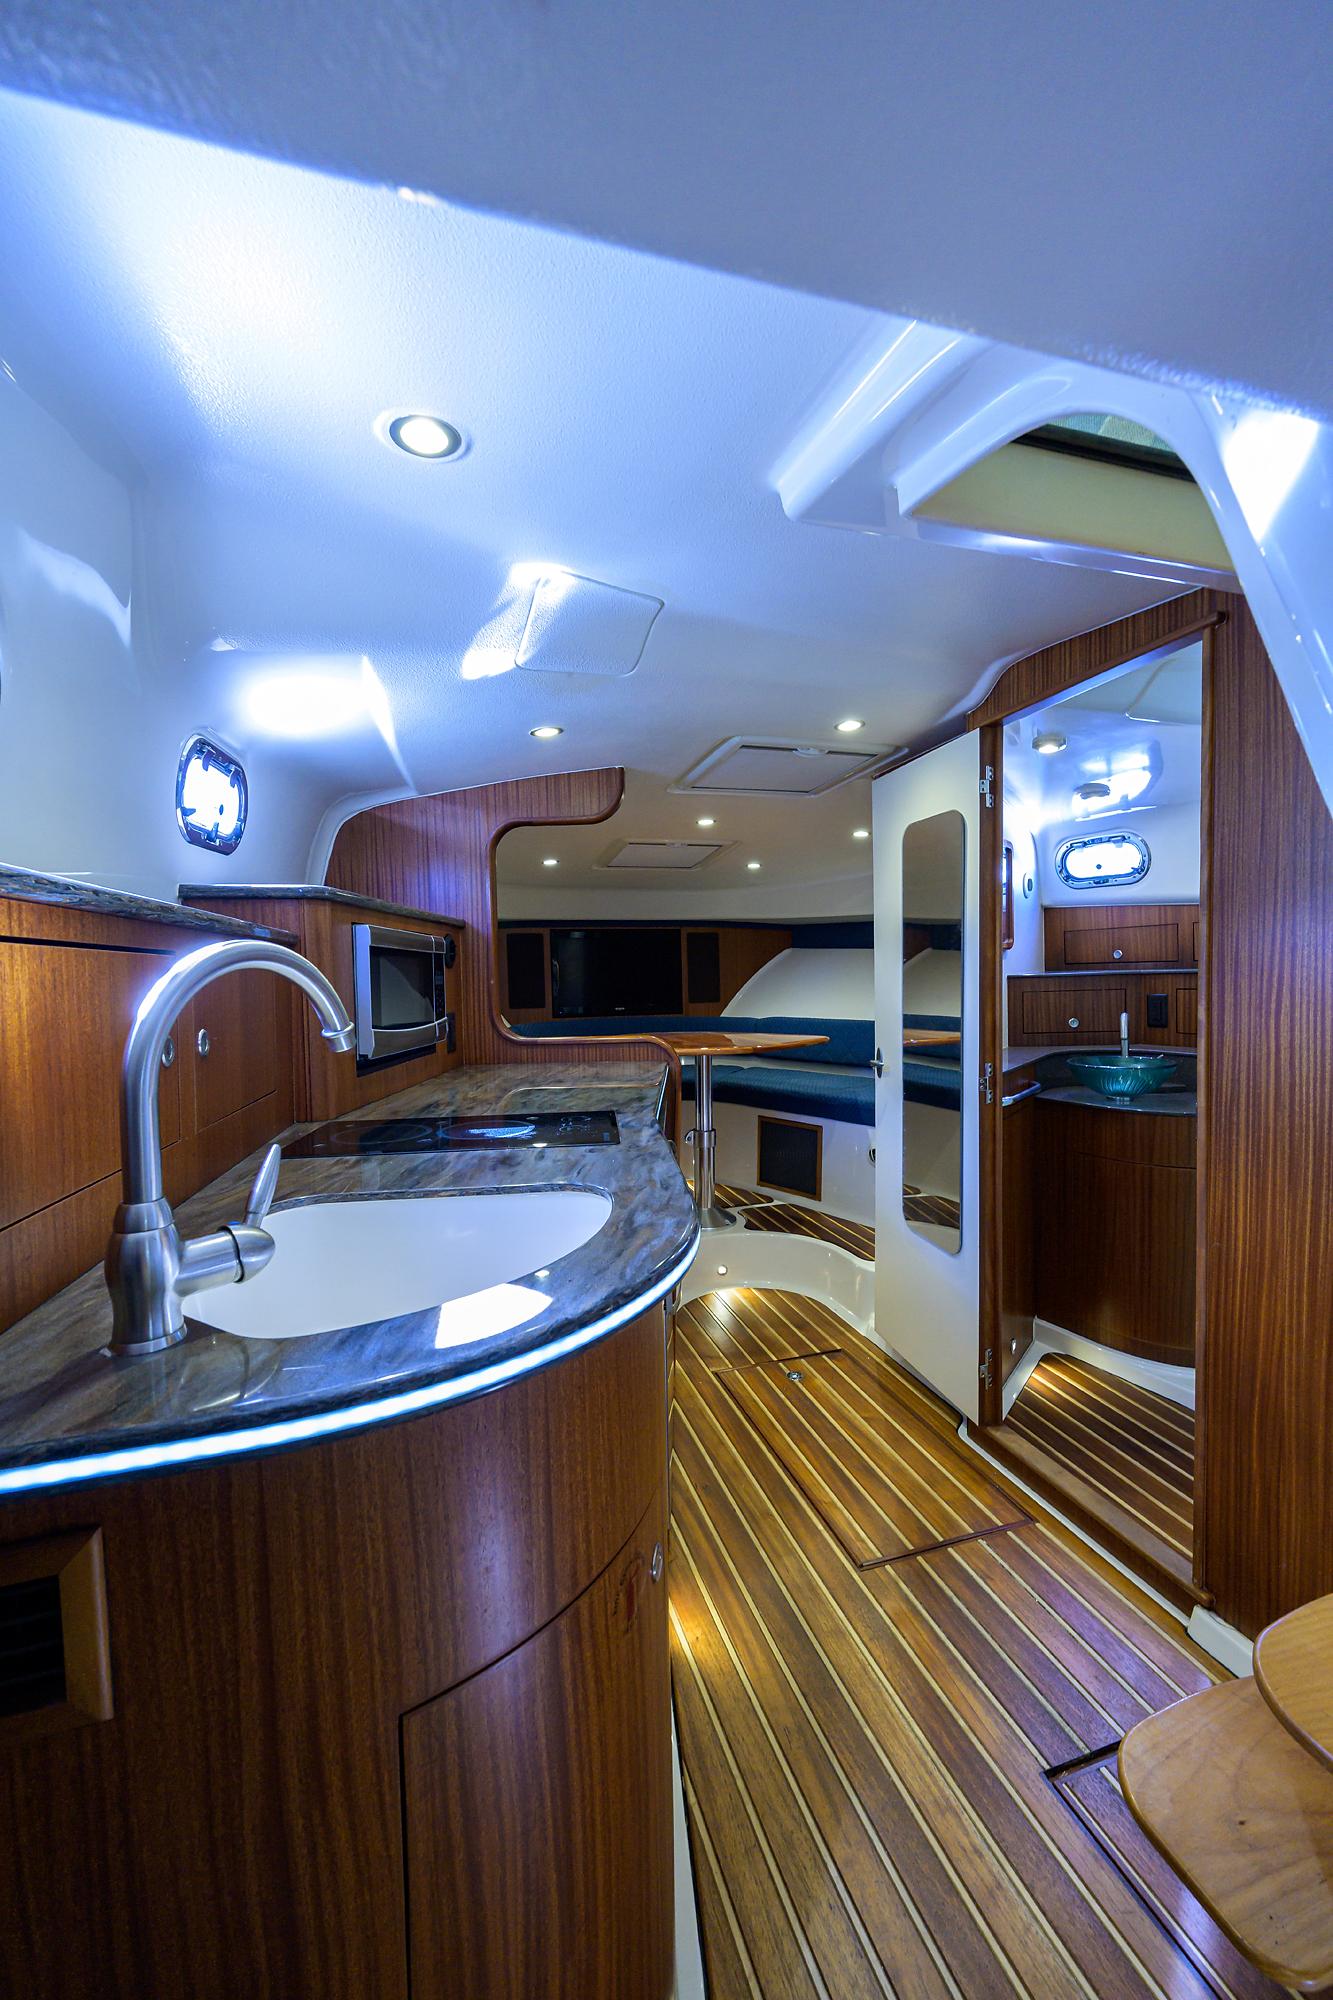 Pursuit 38 Nauti Buoy II - Interior galley and sink